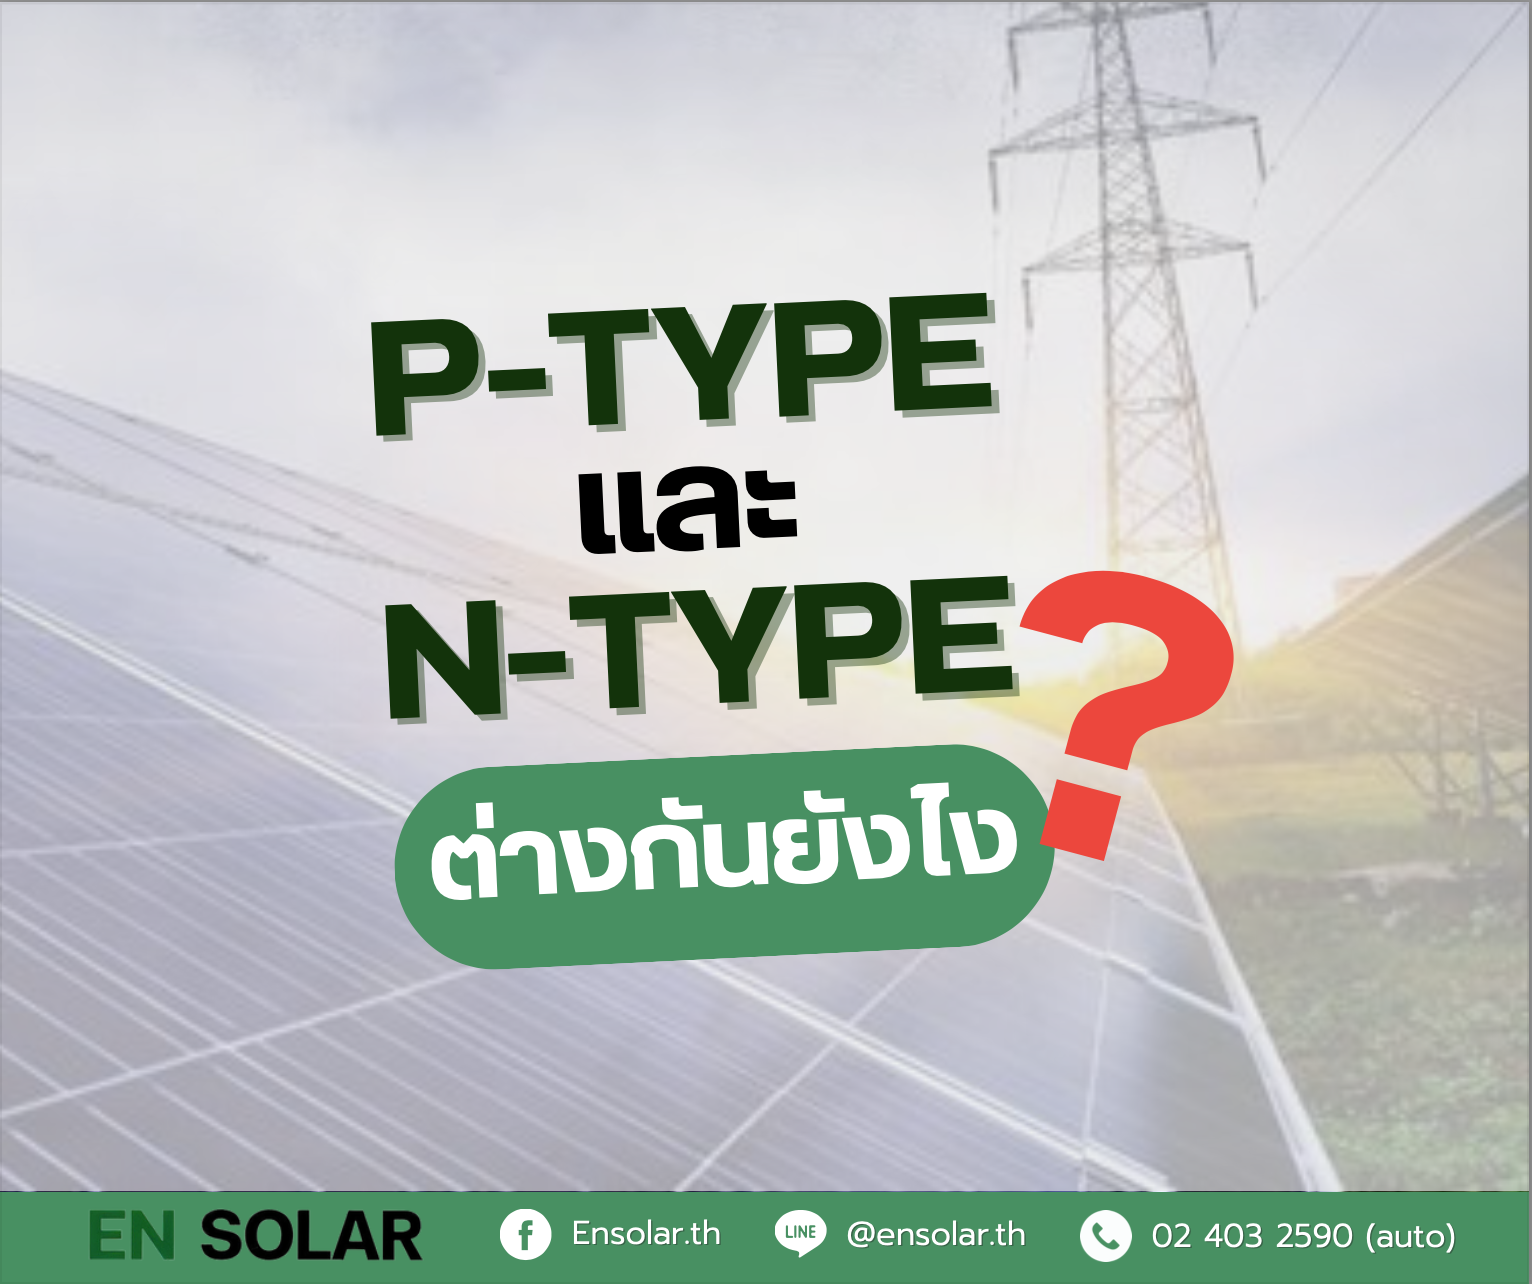 What is the difference between P-TYPE and N-TYPE solar panels?